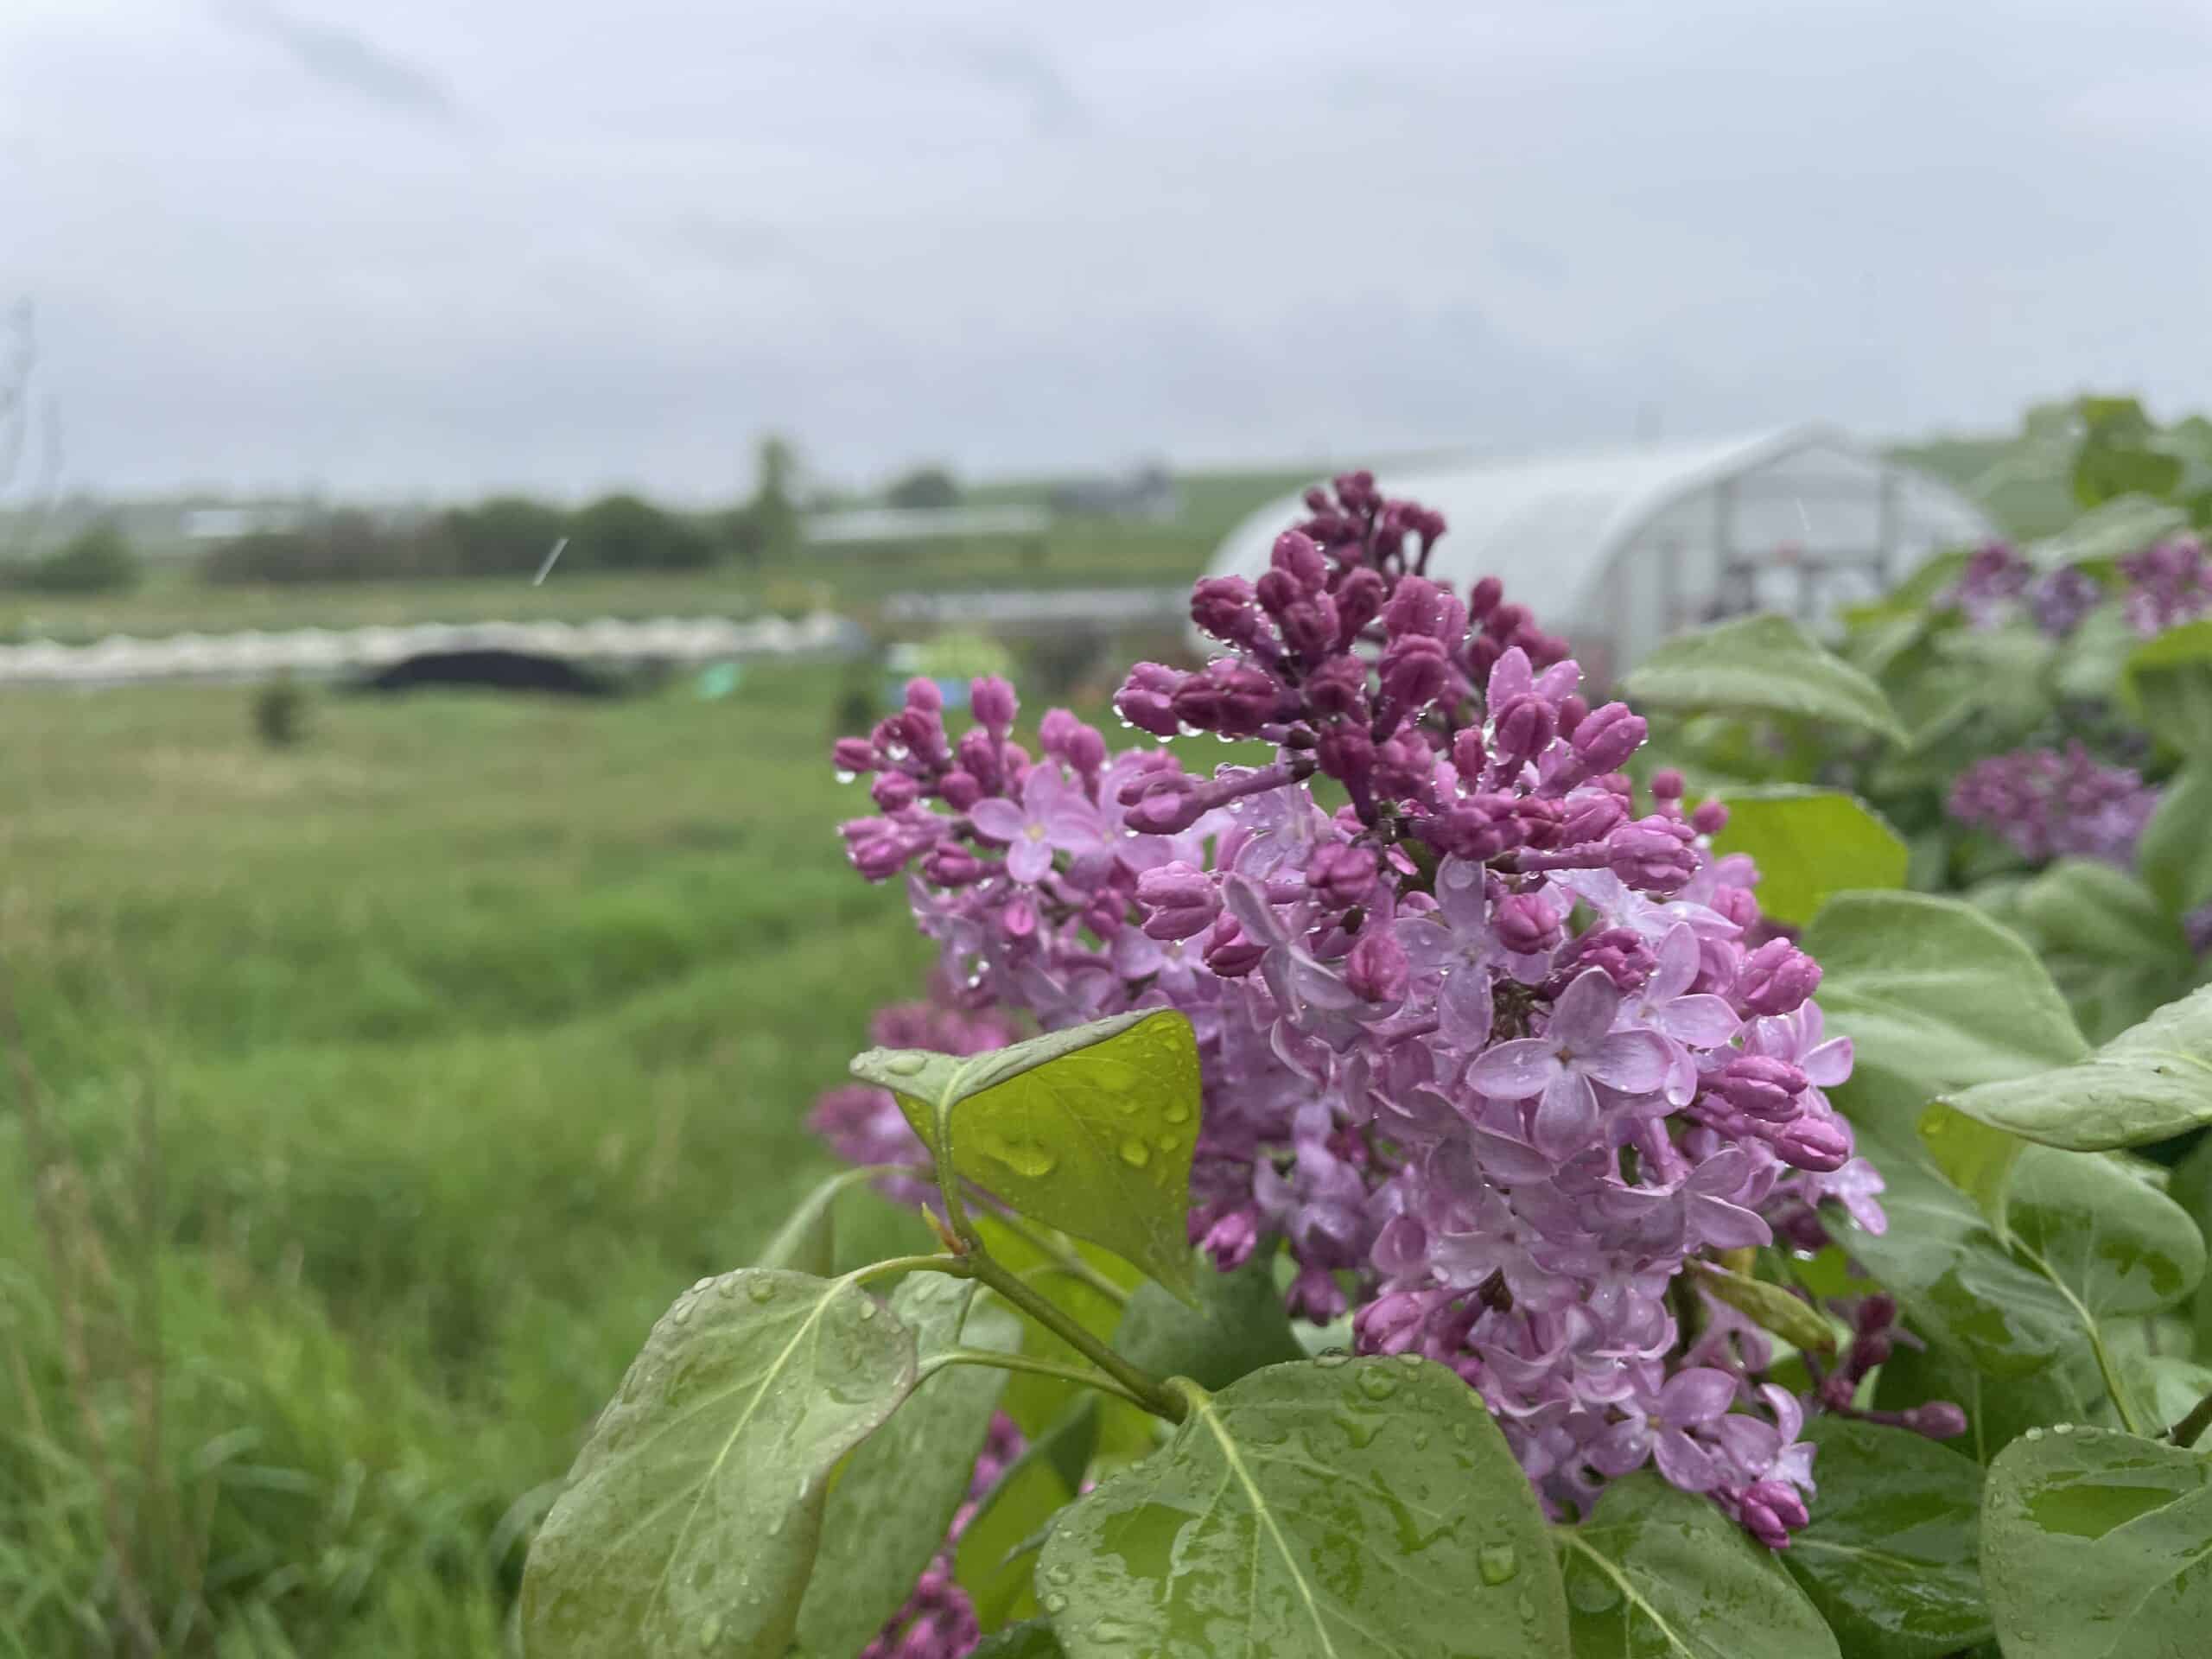 Lilac on the farm on a rainy day scaled - A rainy moment for announcements